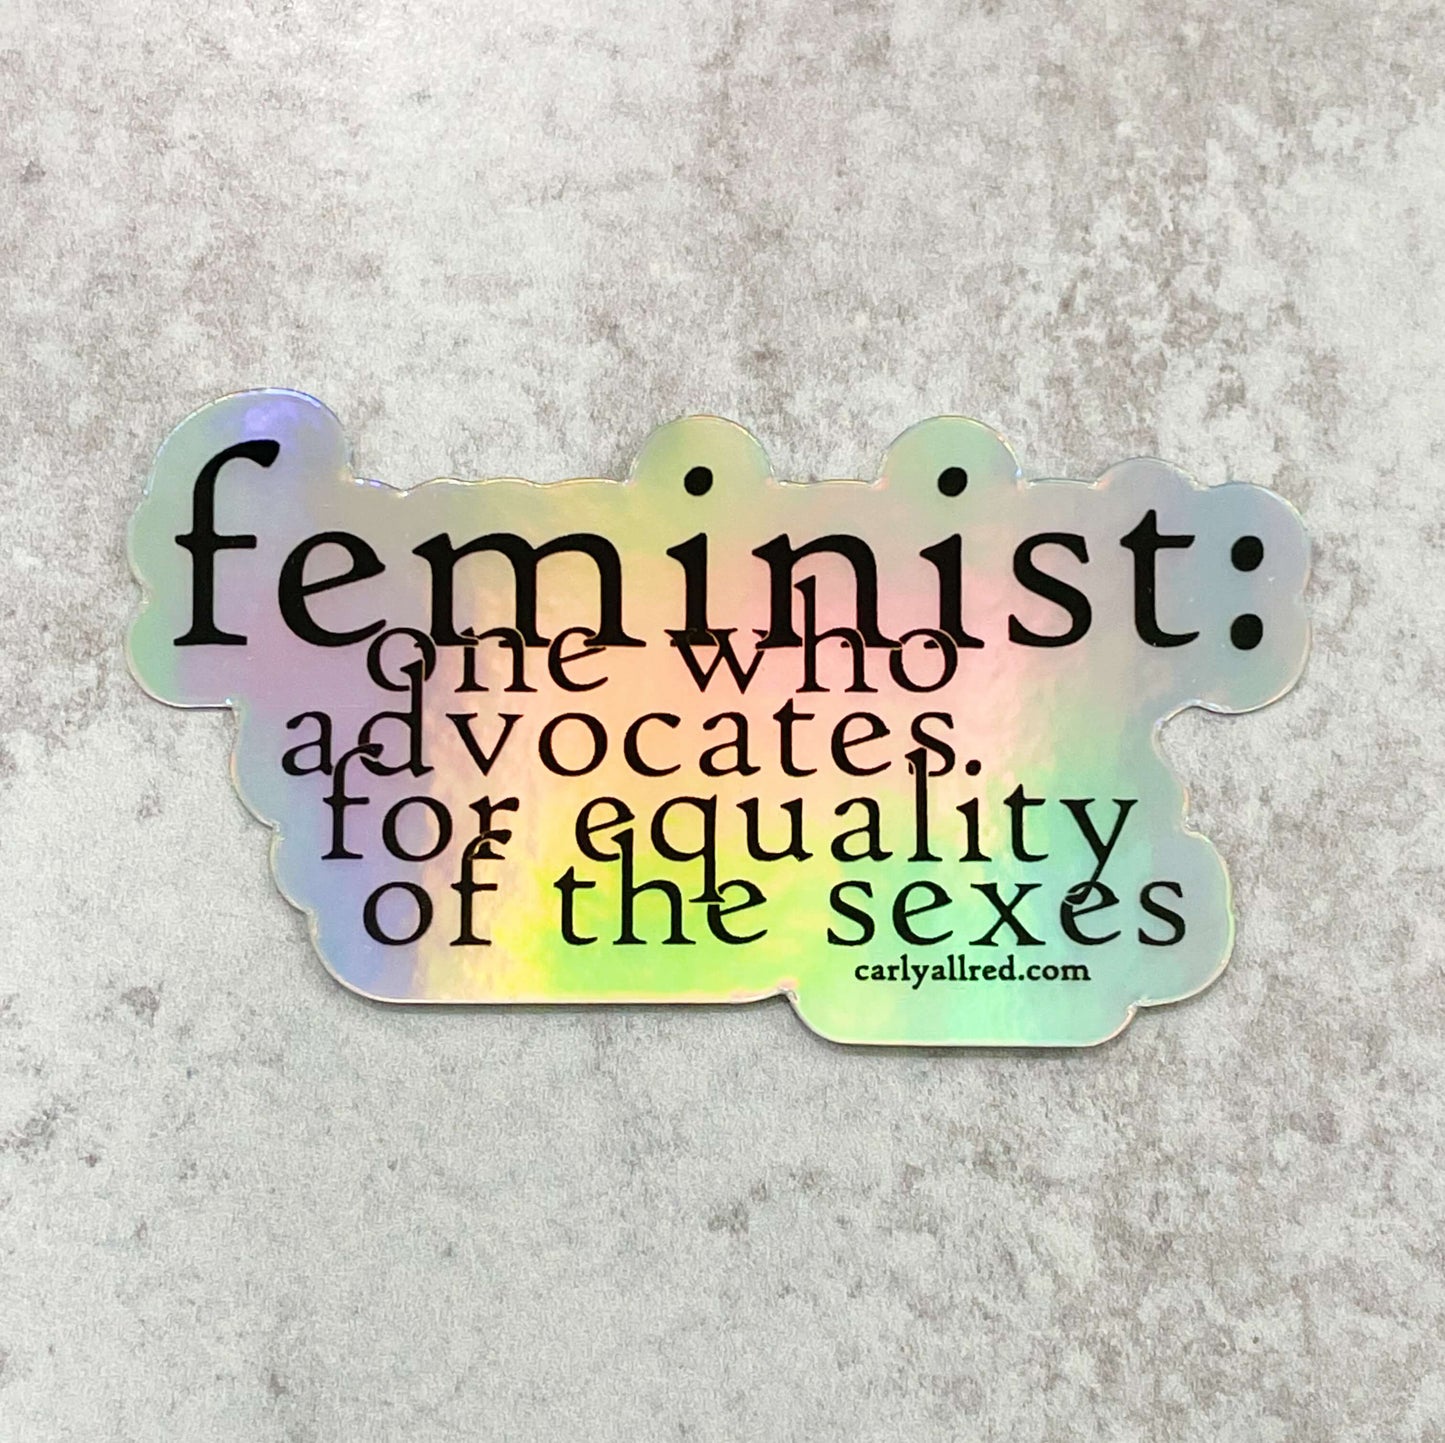 Definition of Feminist Sticker - Holographic